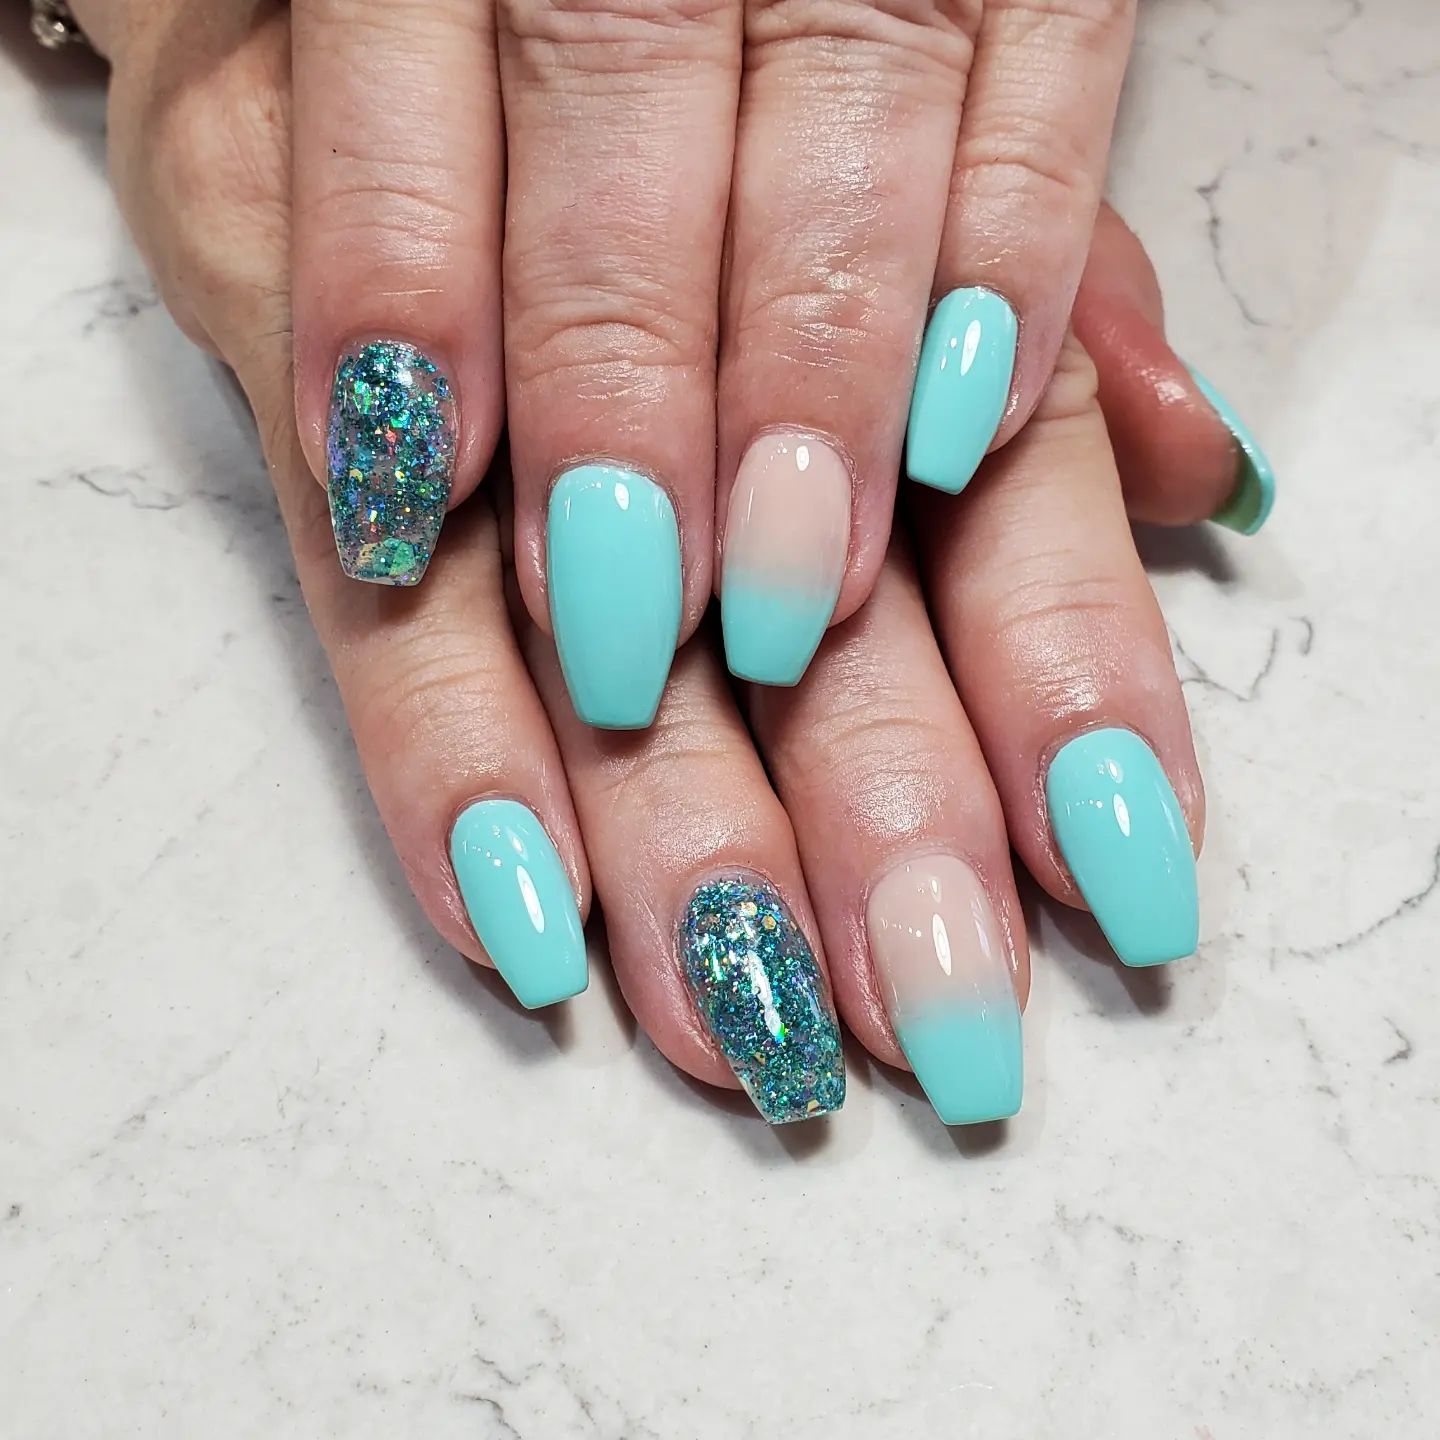 The beautiful color of the sea, turquois, looks perfect when combined with an ombre and glittered accent.